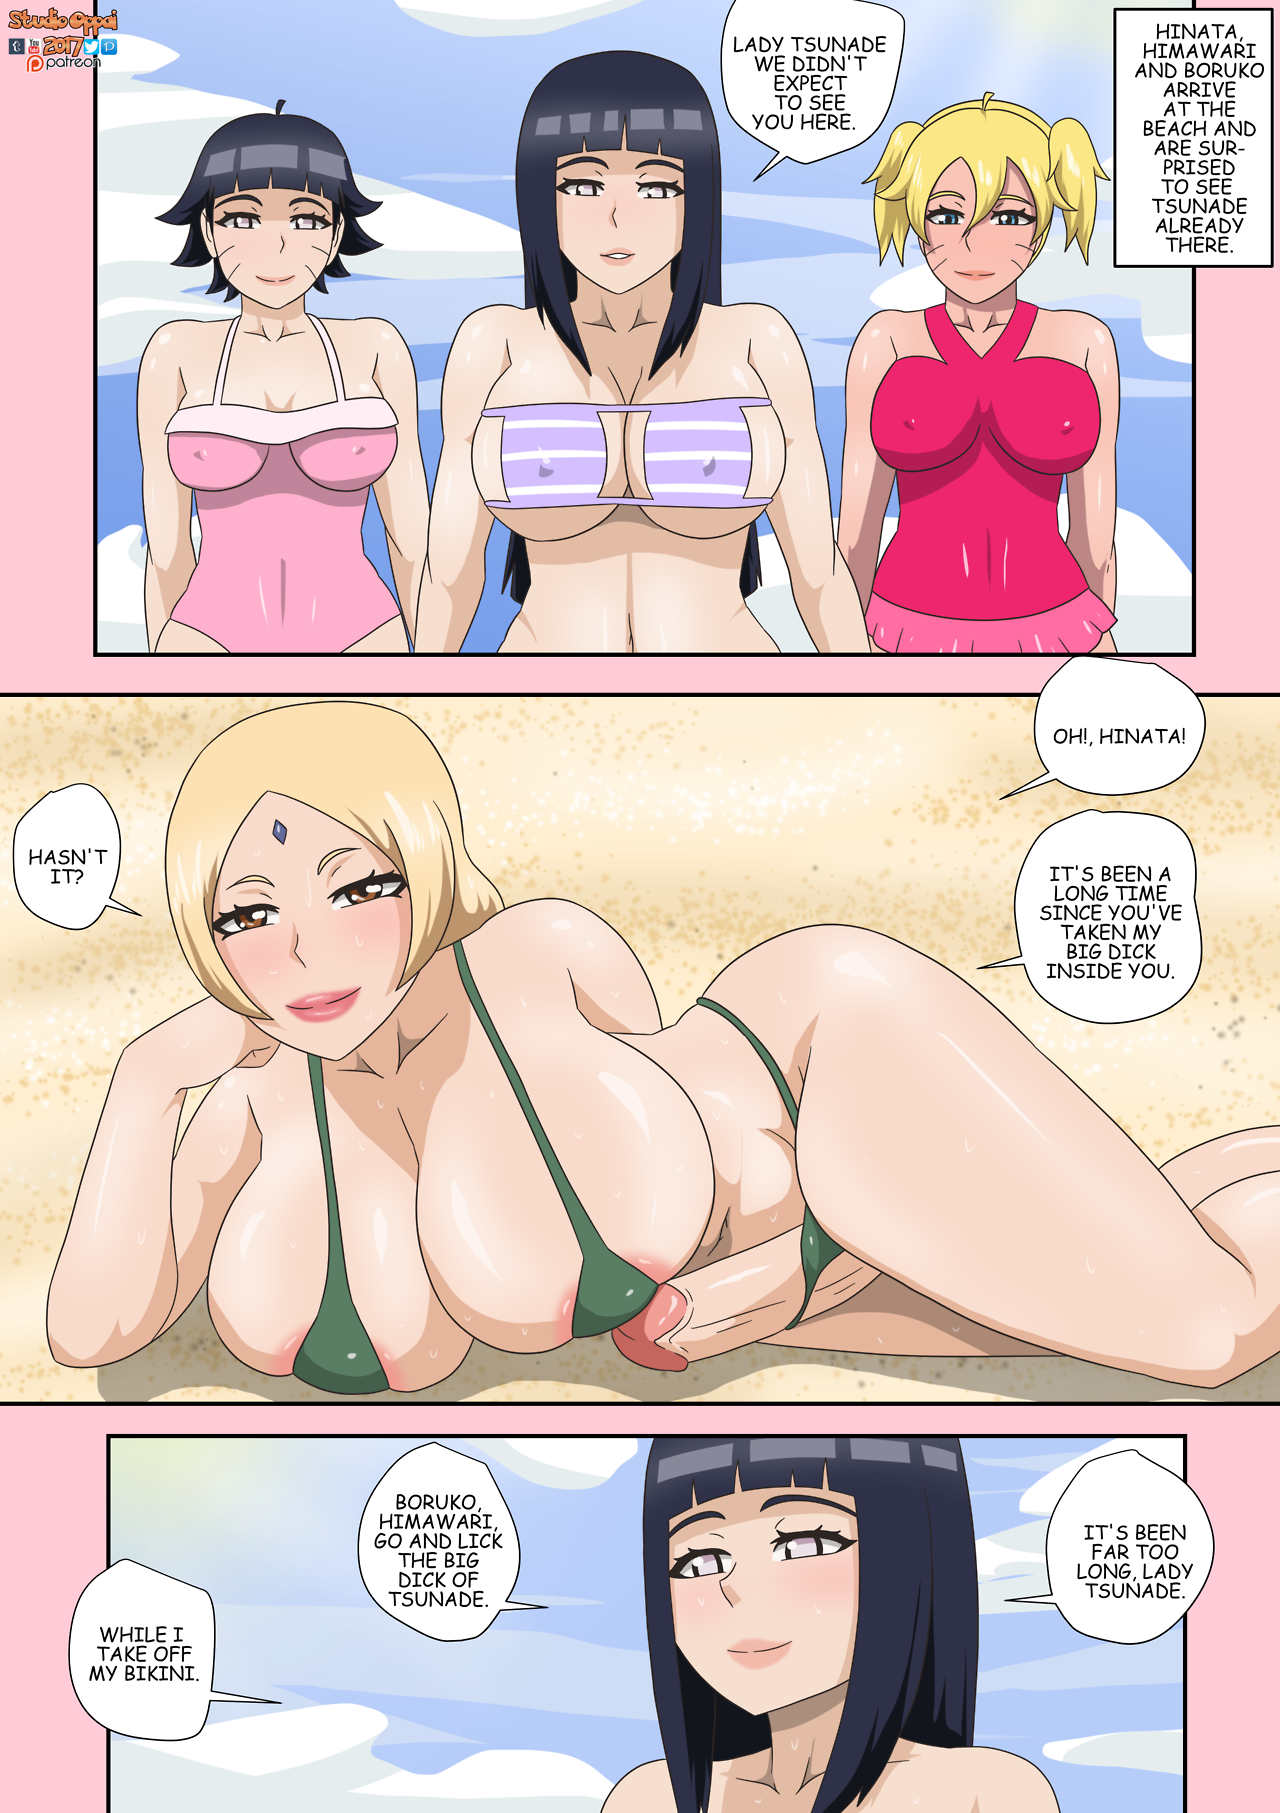 Updated from Studio Oppai A Beautiful Day at the Beach 7 pages Hentai Comics